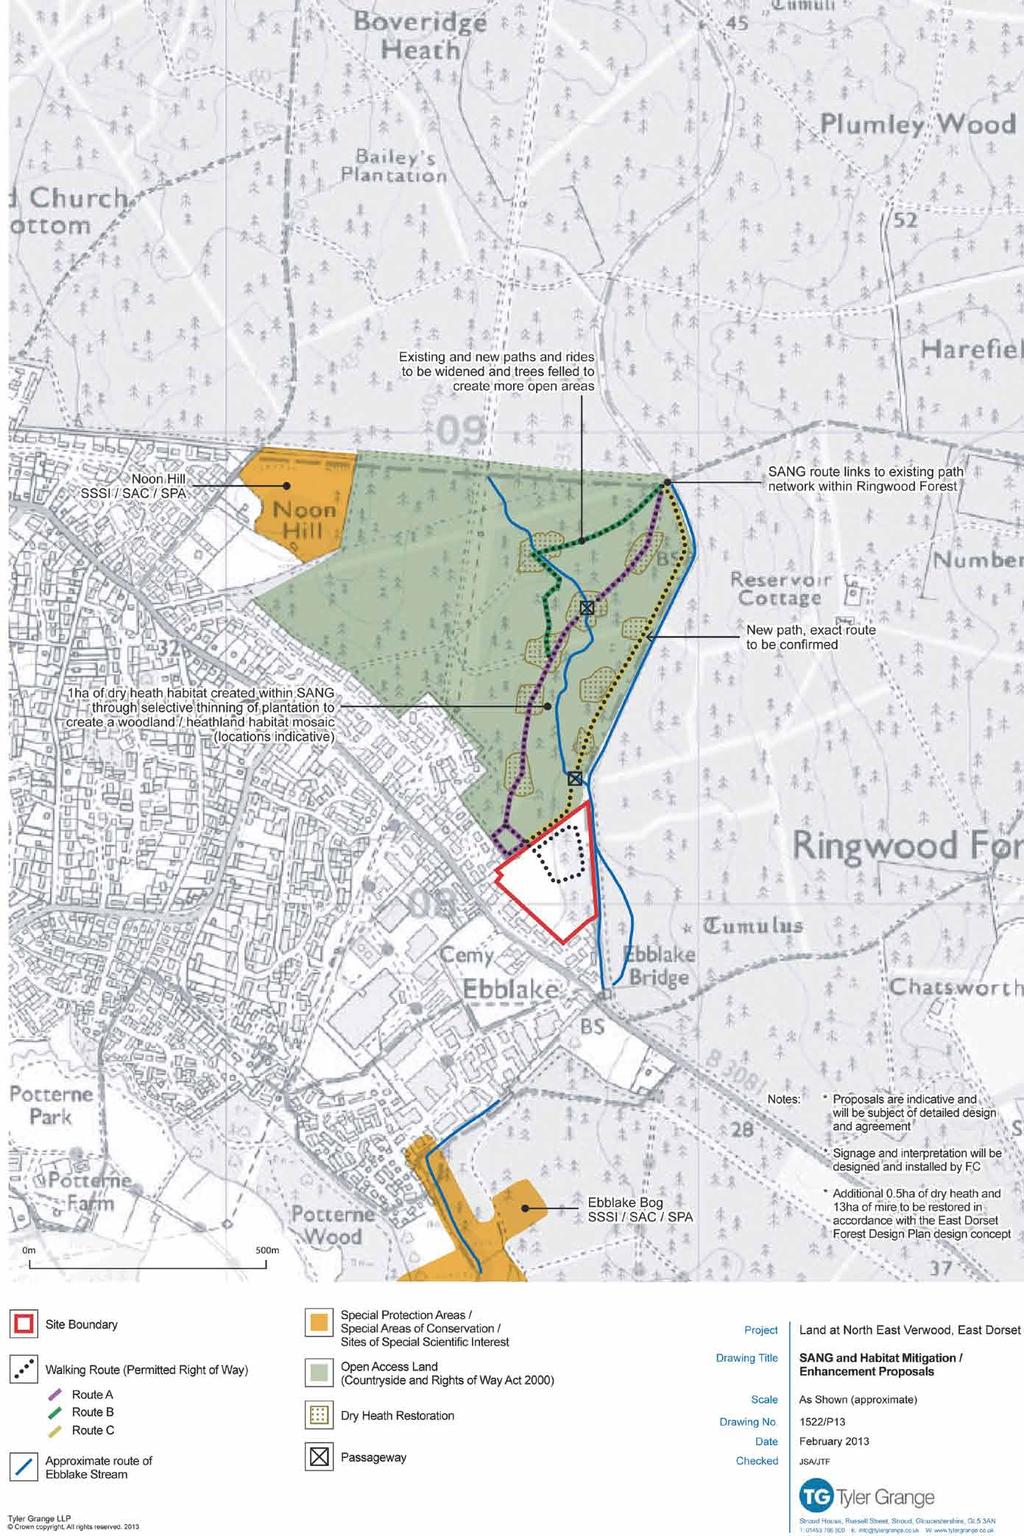 Suitable Accessible Natural Greenspace (SANG) Strategy In accordance with emerging planning guidance in respect of residential development and the Special Protection Area (SPA), a Suitable Accessible